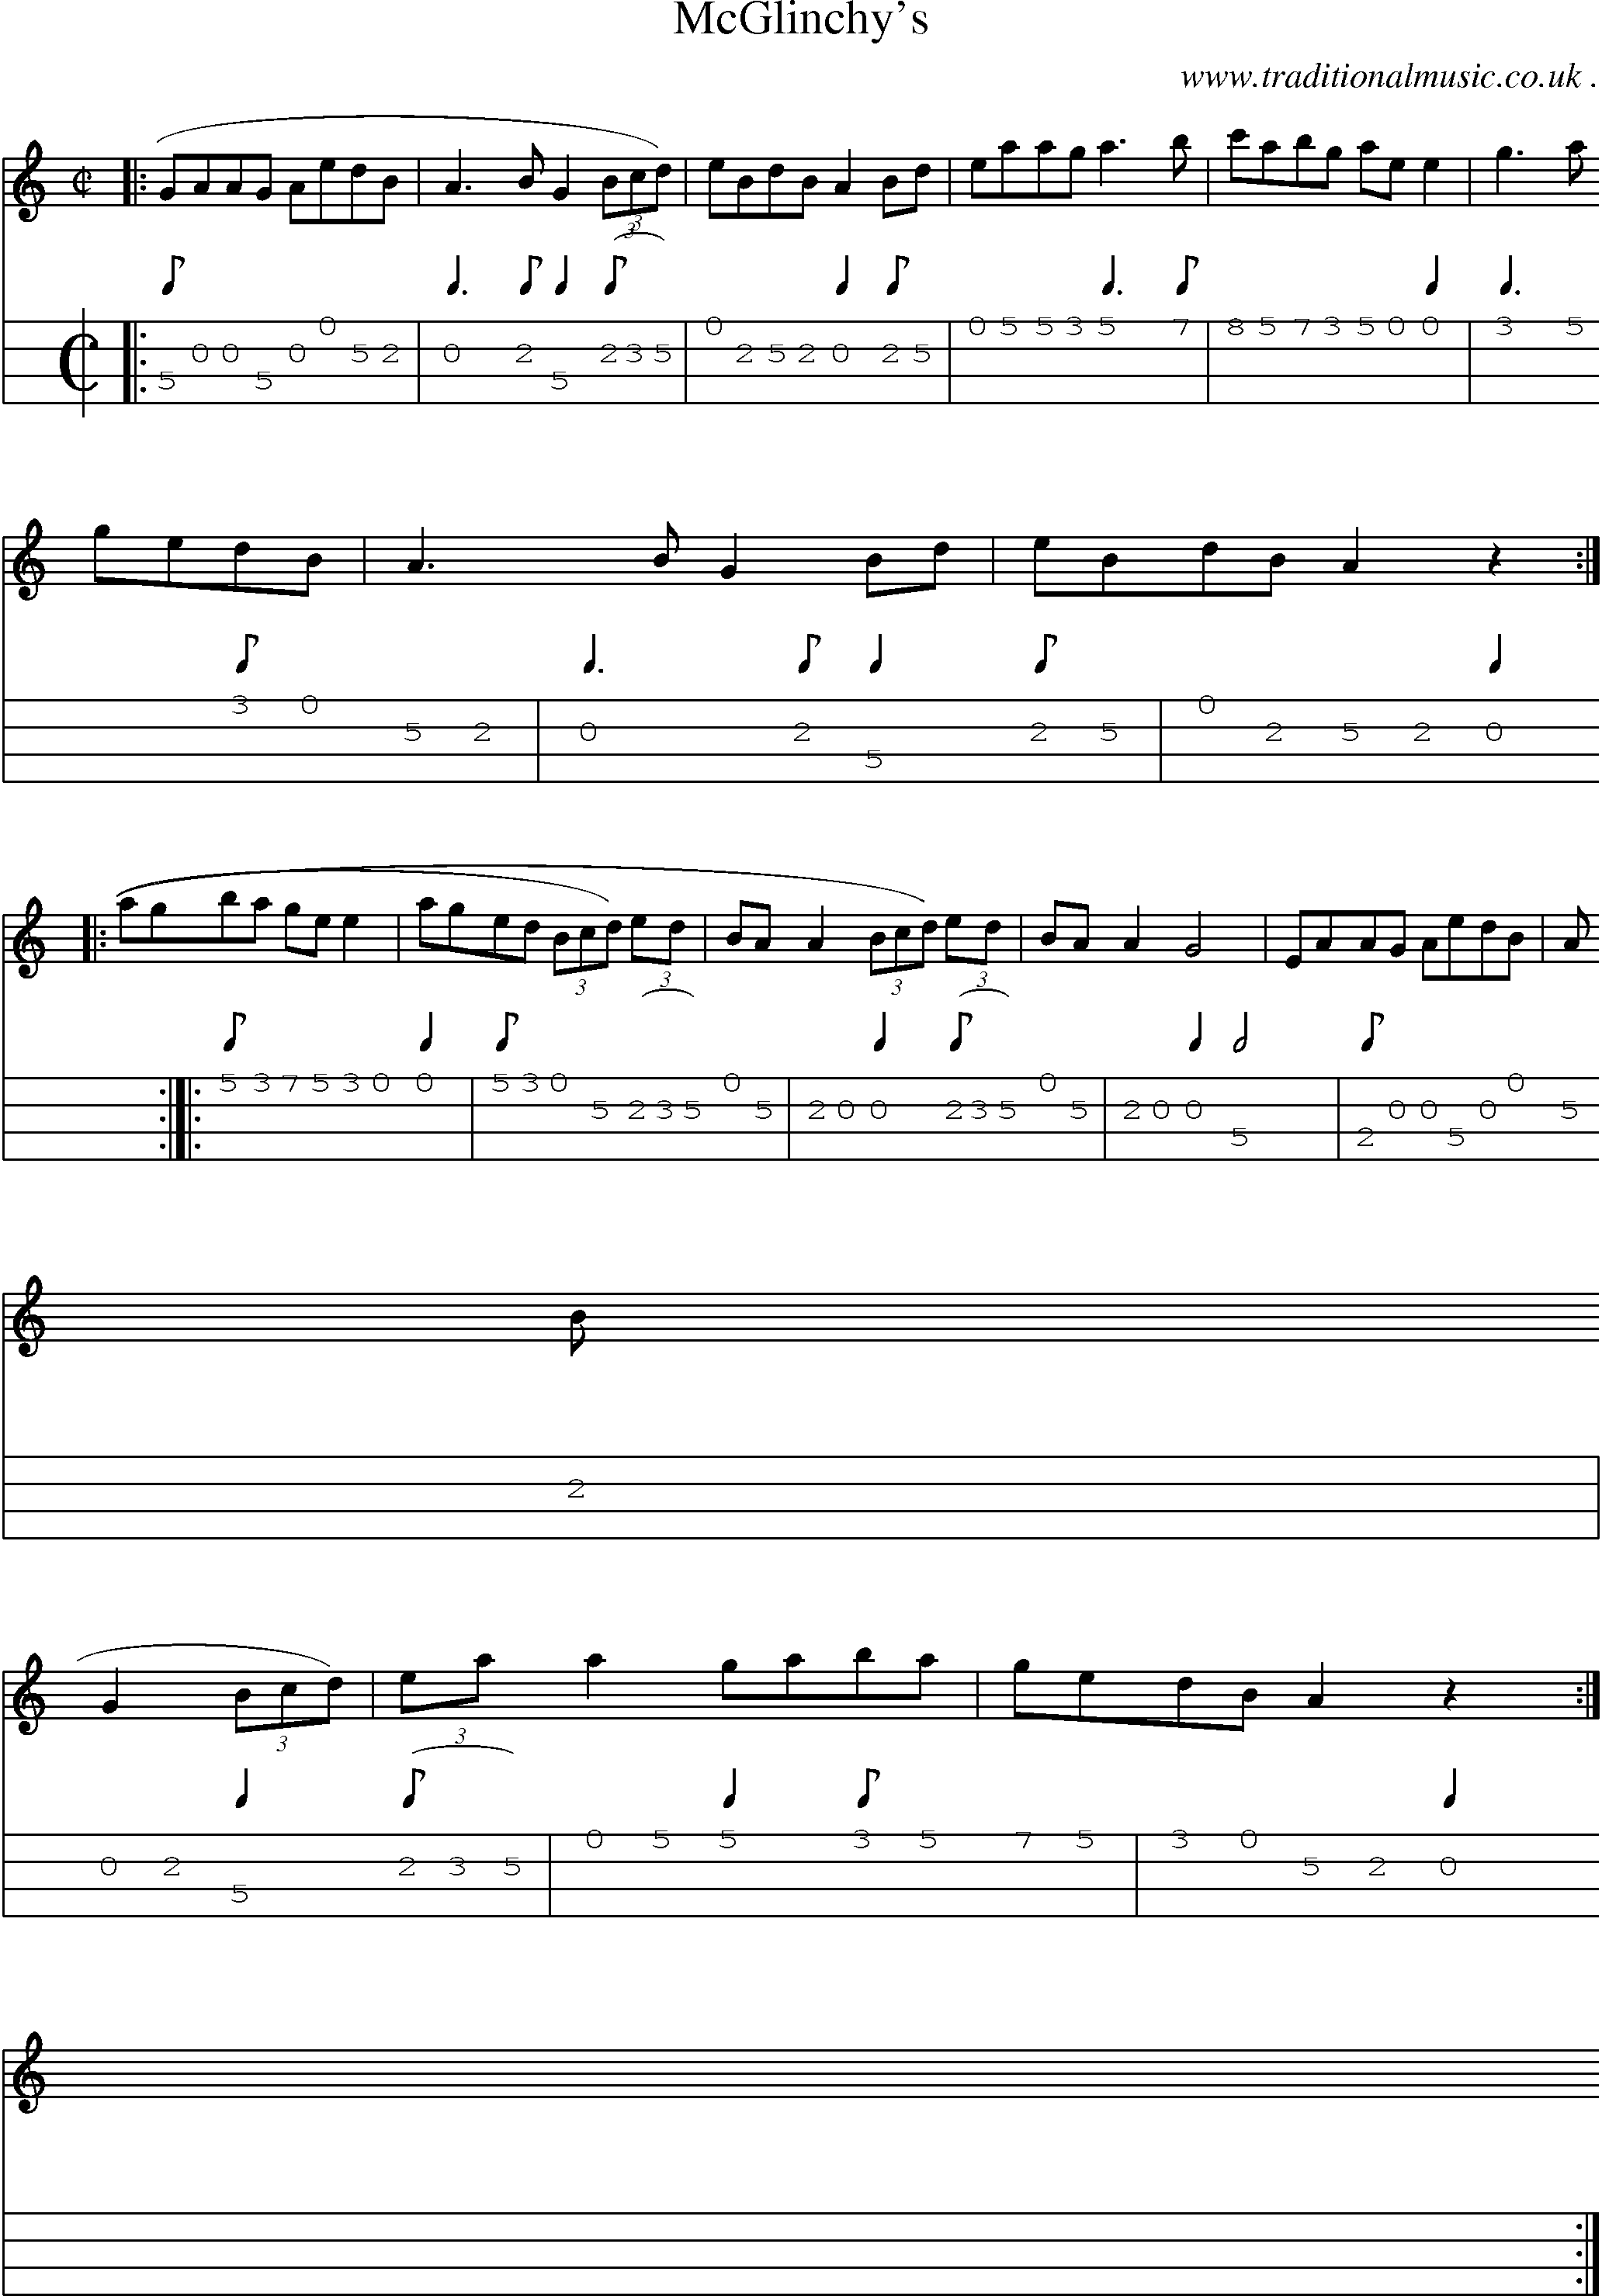 Sheet-Music and Mandolin Tabs for Mcglinchys